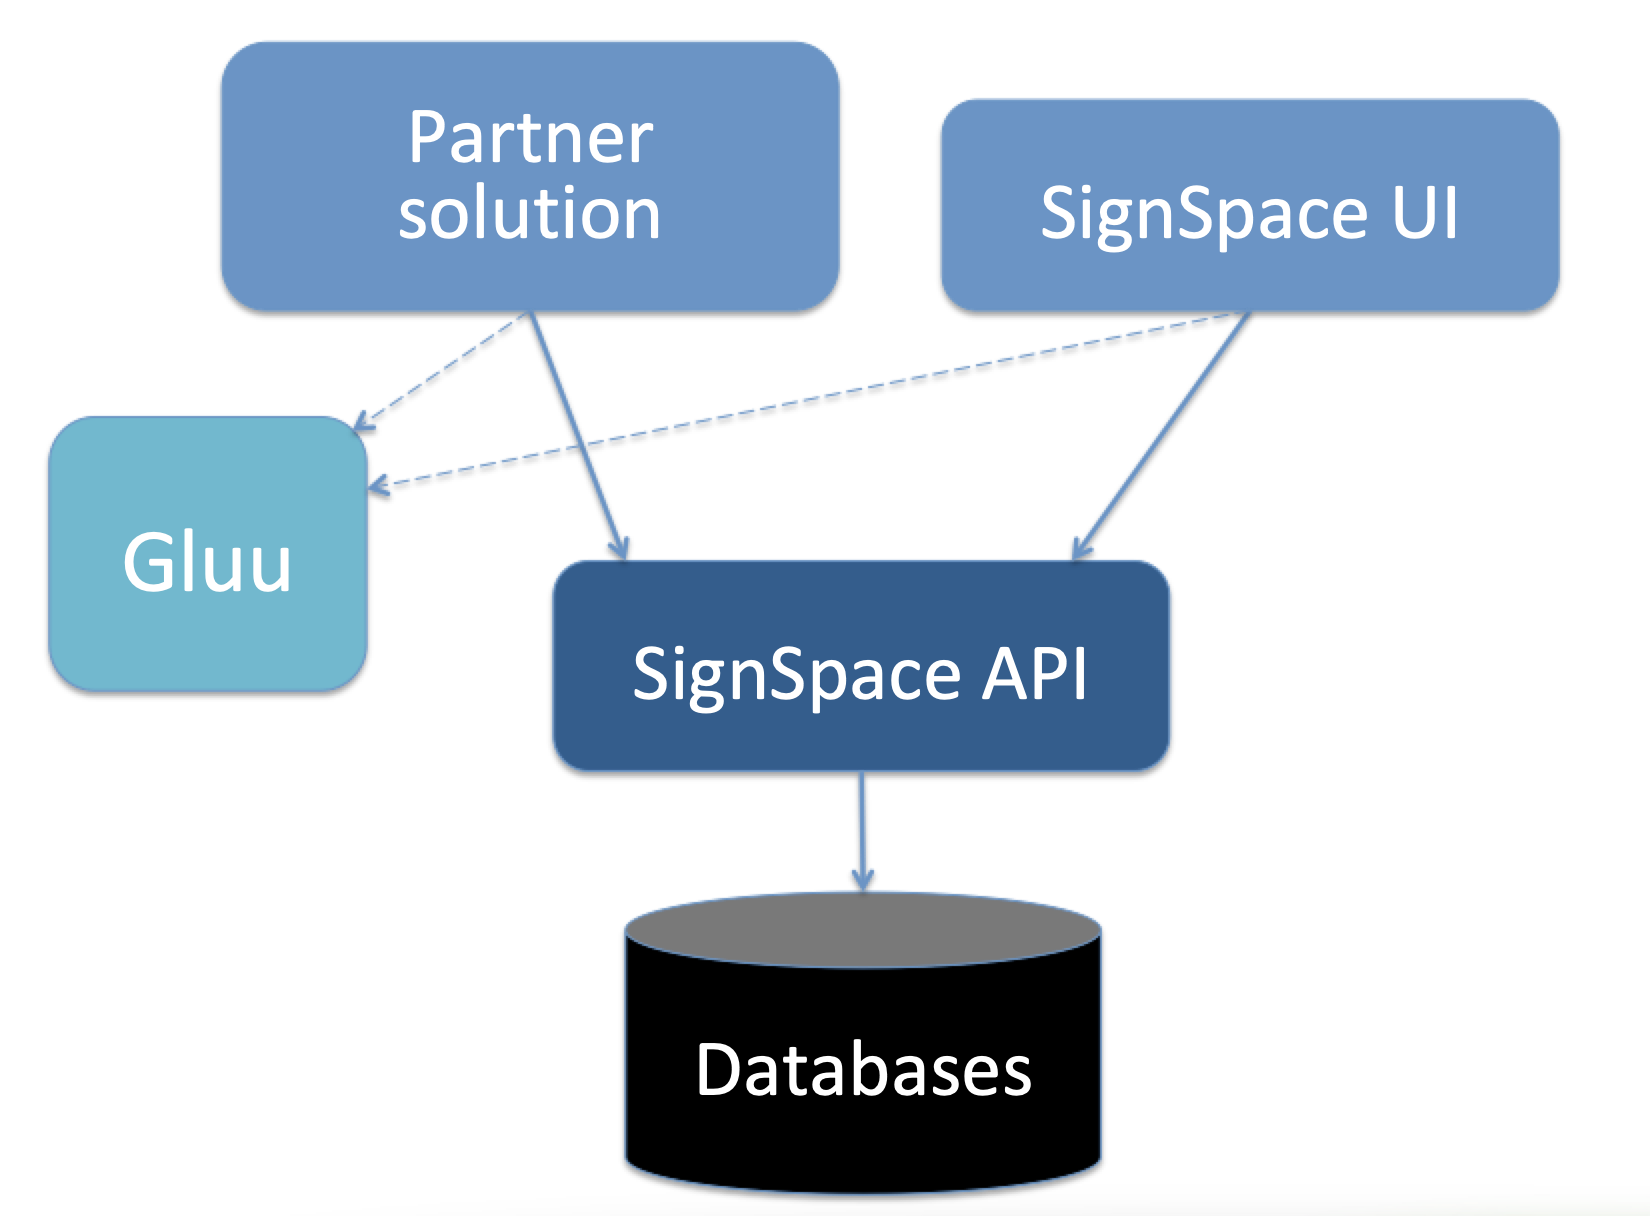 SignSpace architecture, simplified